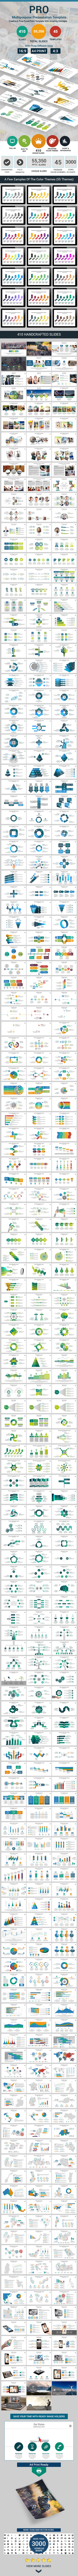 GraphicRiver PRO PowerPoint Presentation Template 11783344